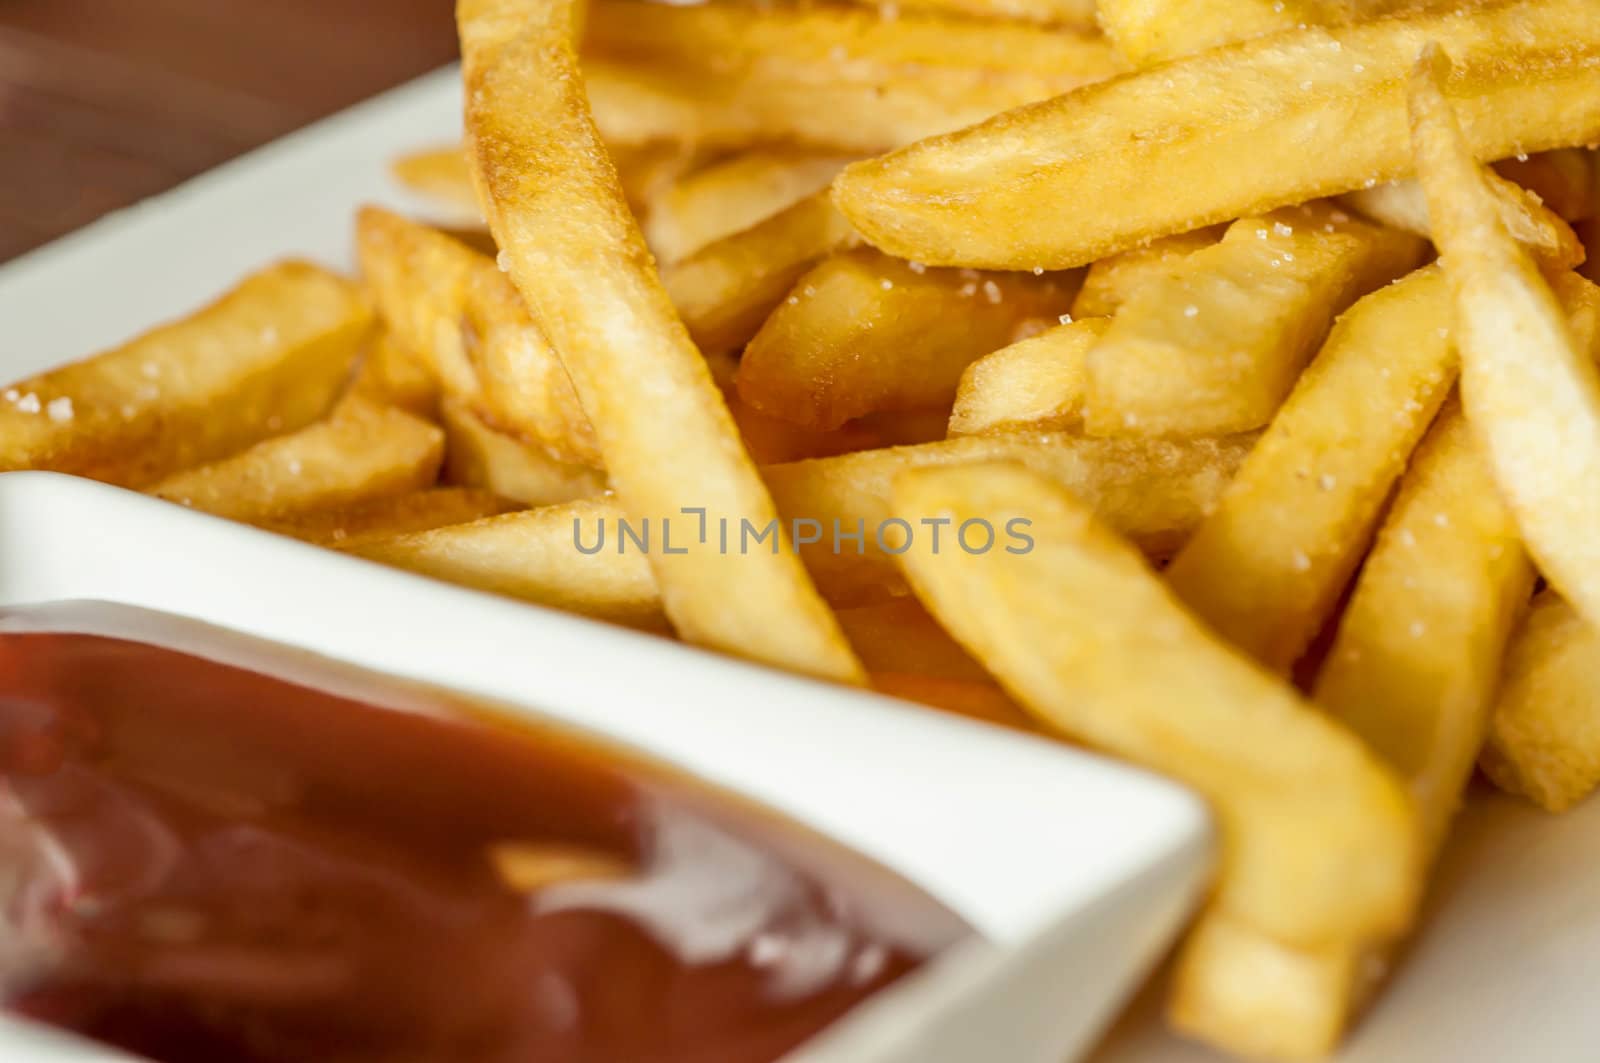 French Fries with Barbecue dipping by TanawatPontchour